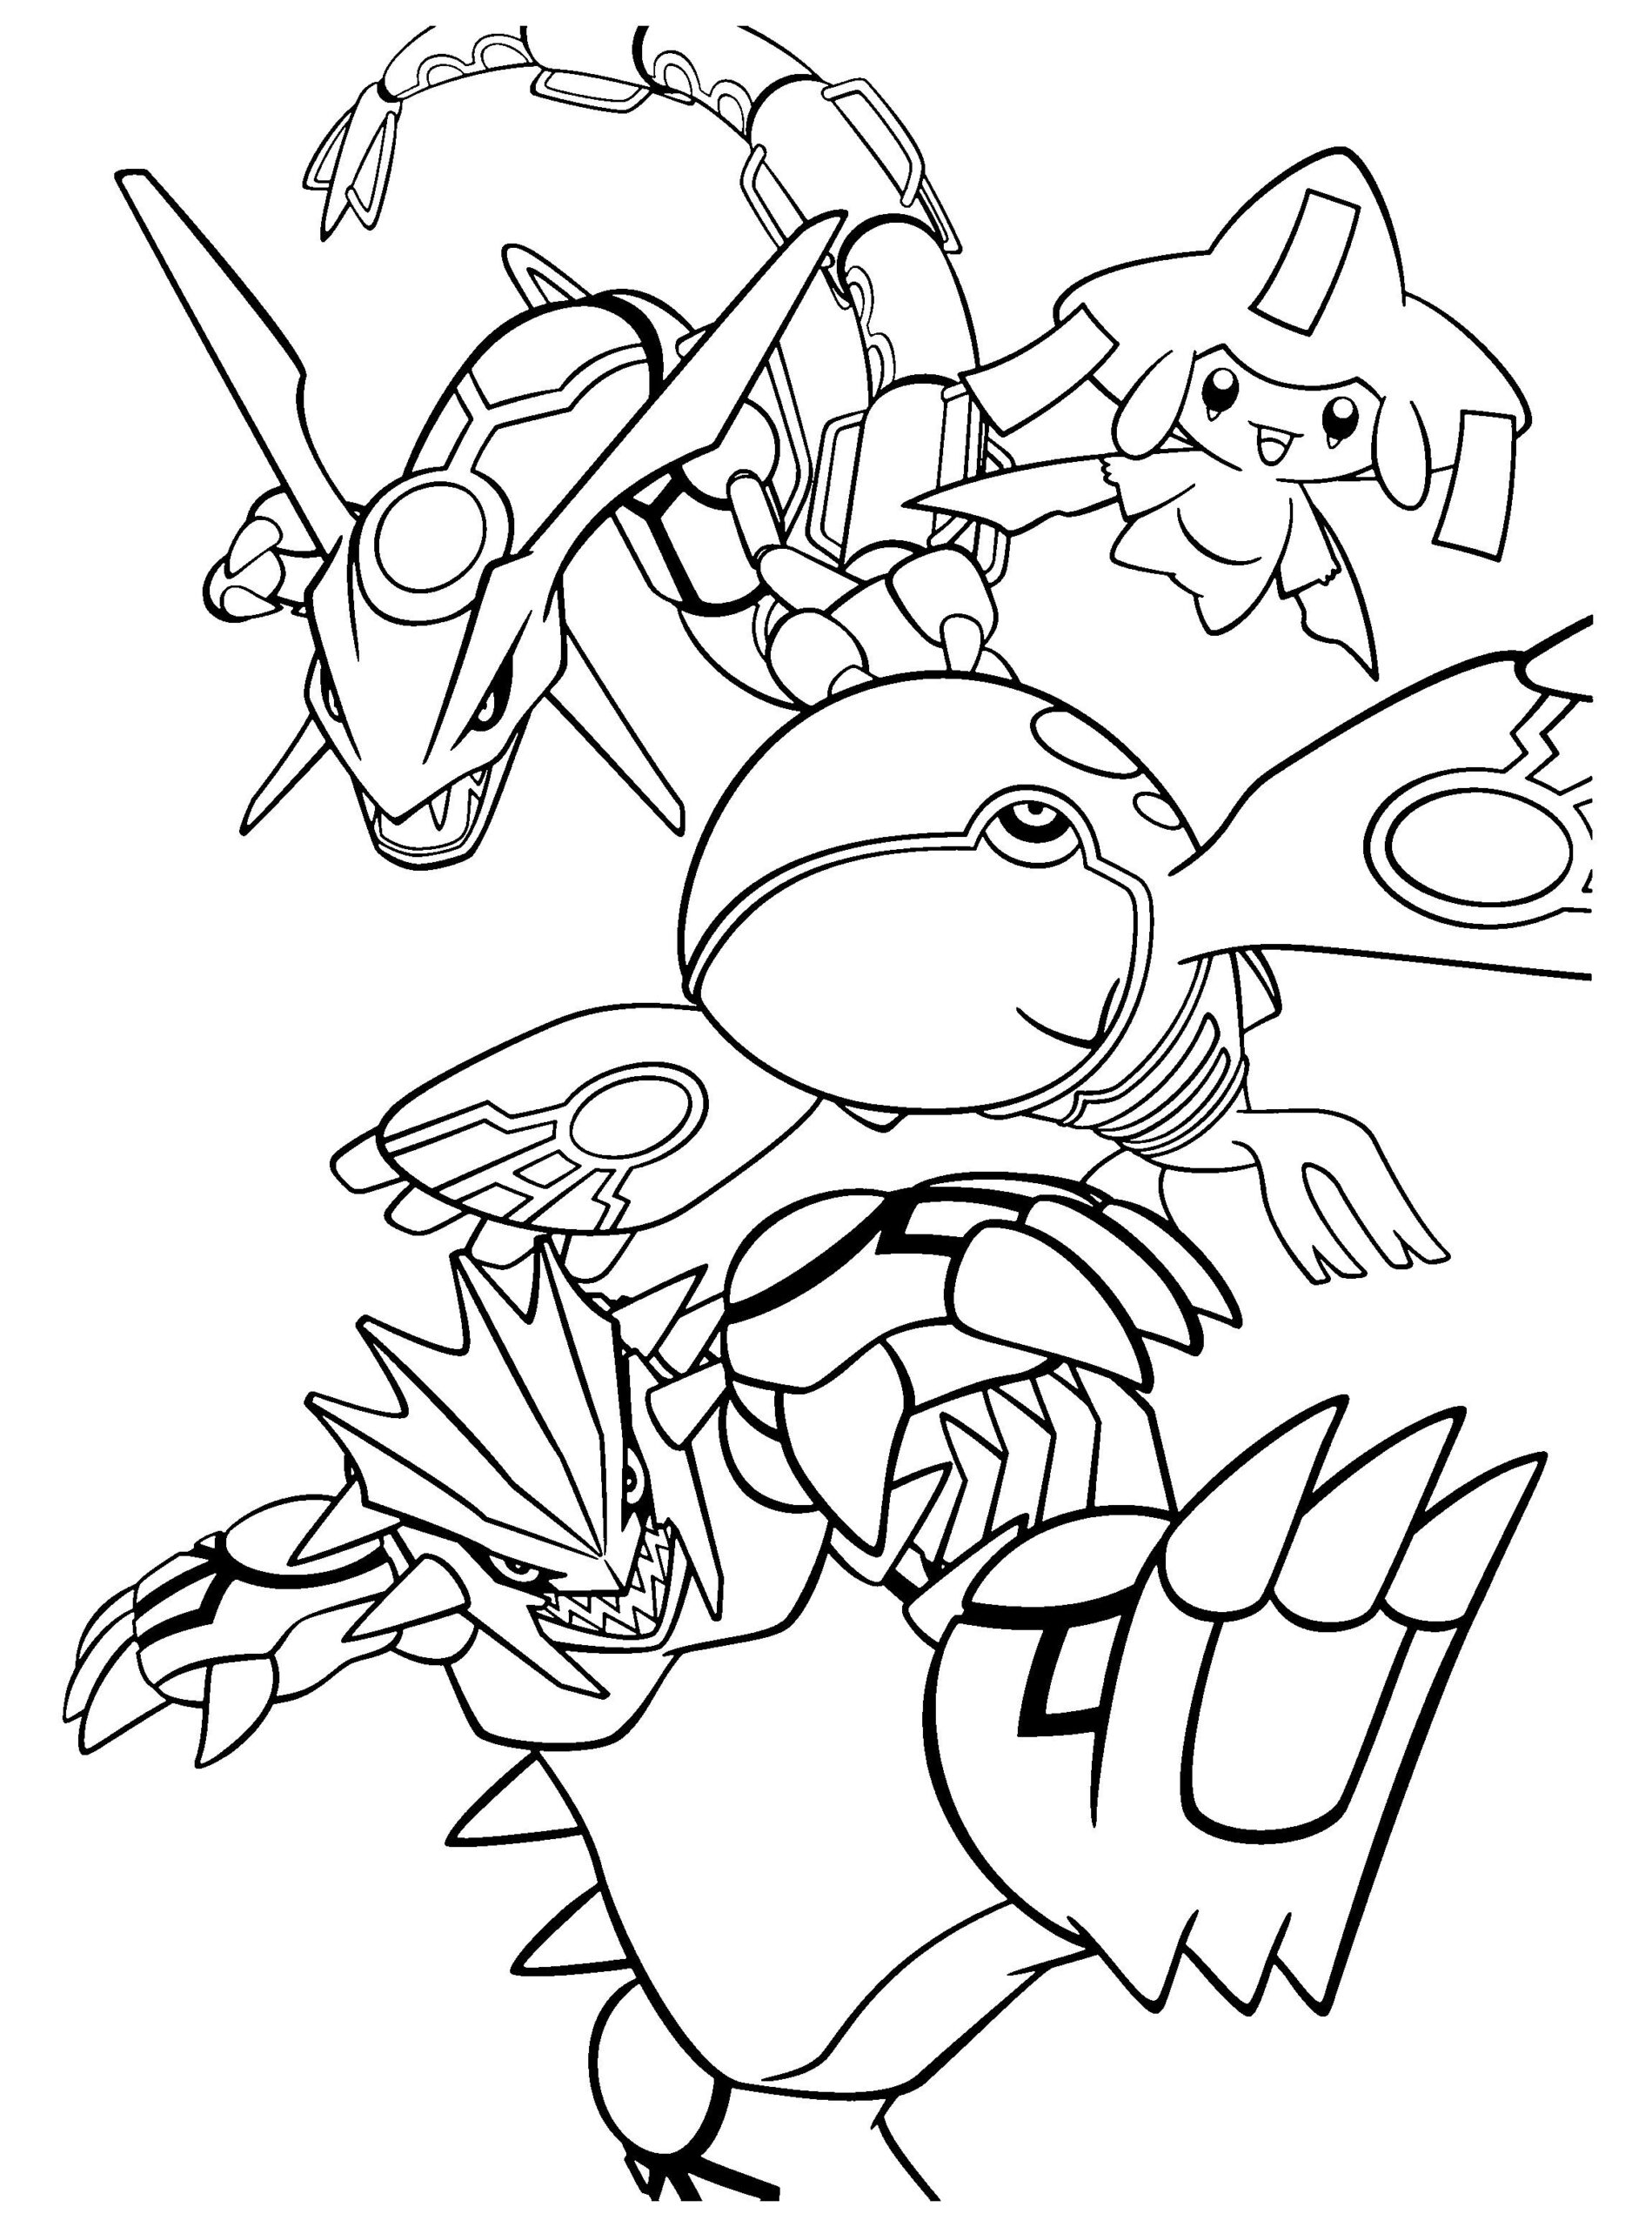 Printable Pokemon Pictures To Color